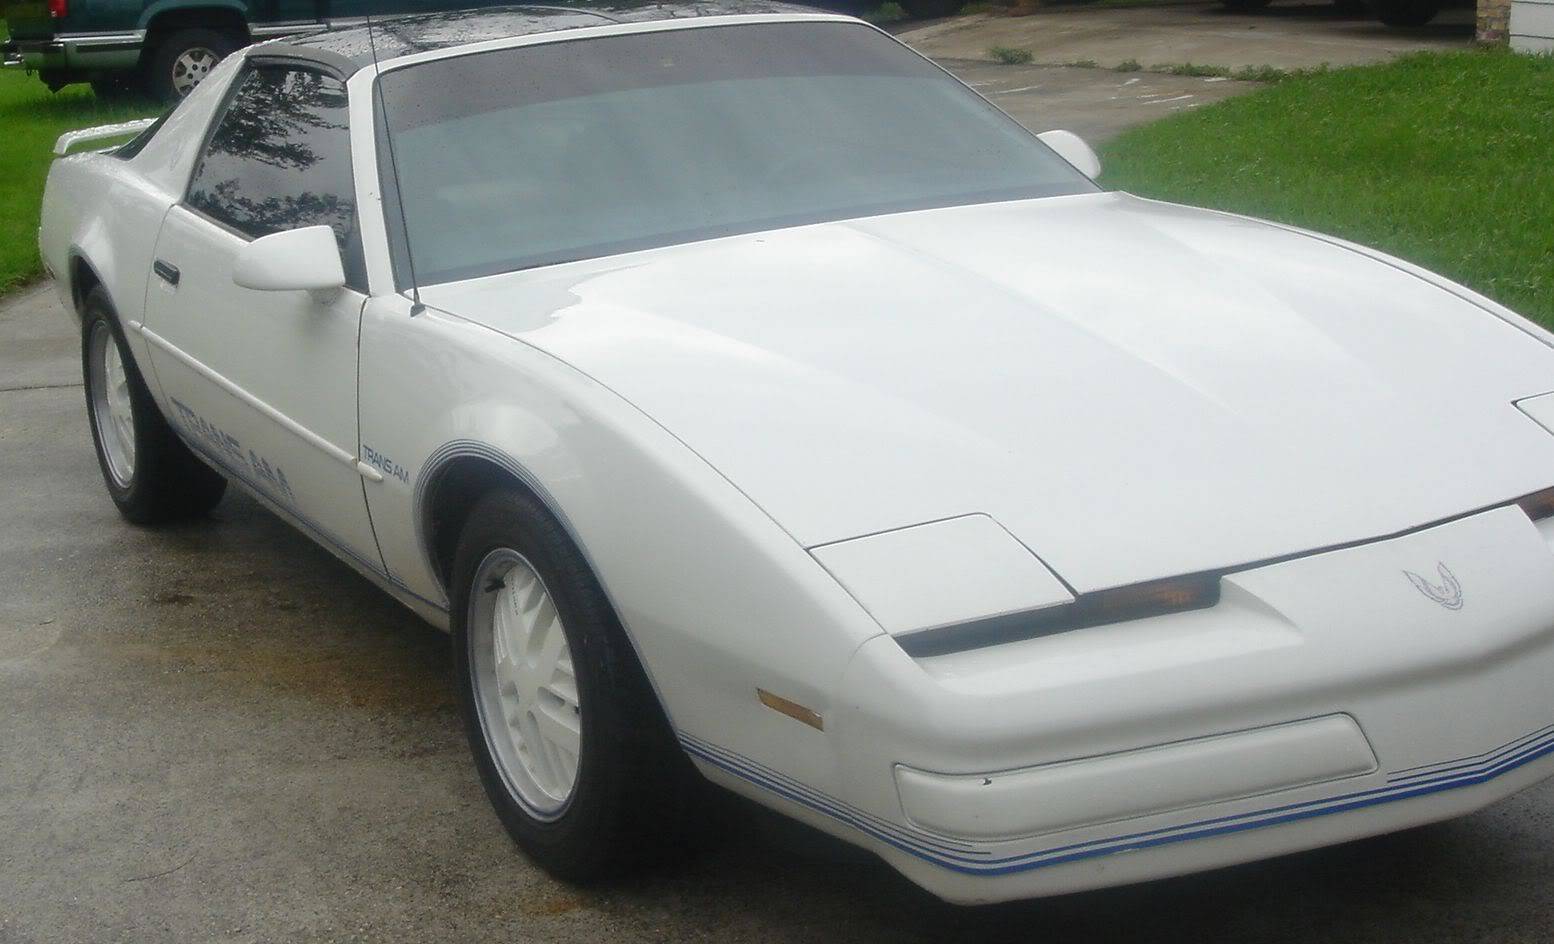 dadeboy305's Trans Am Picture138